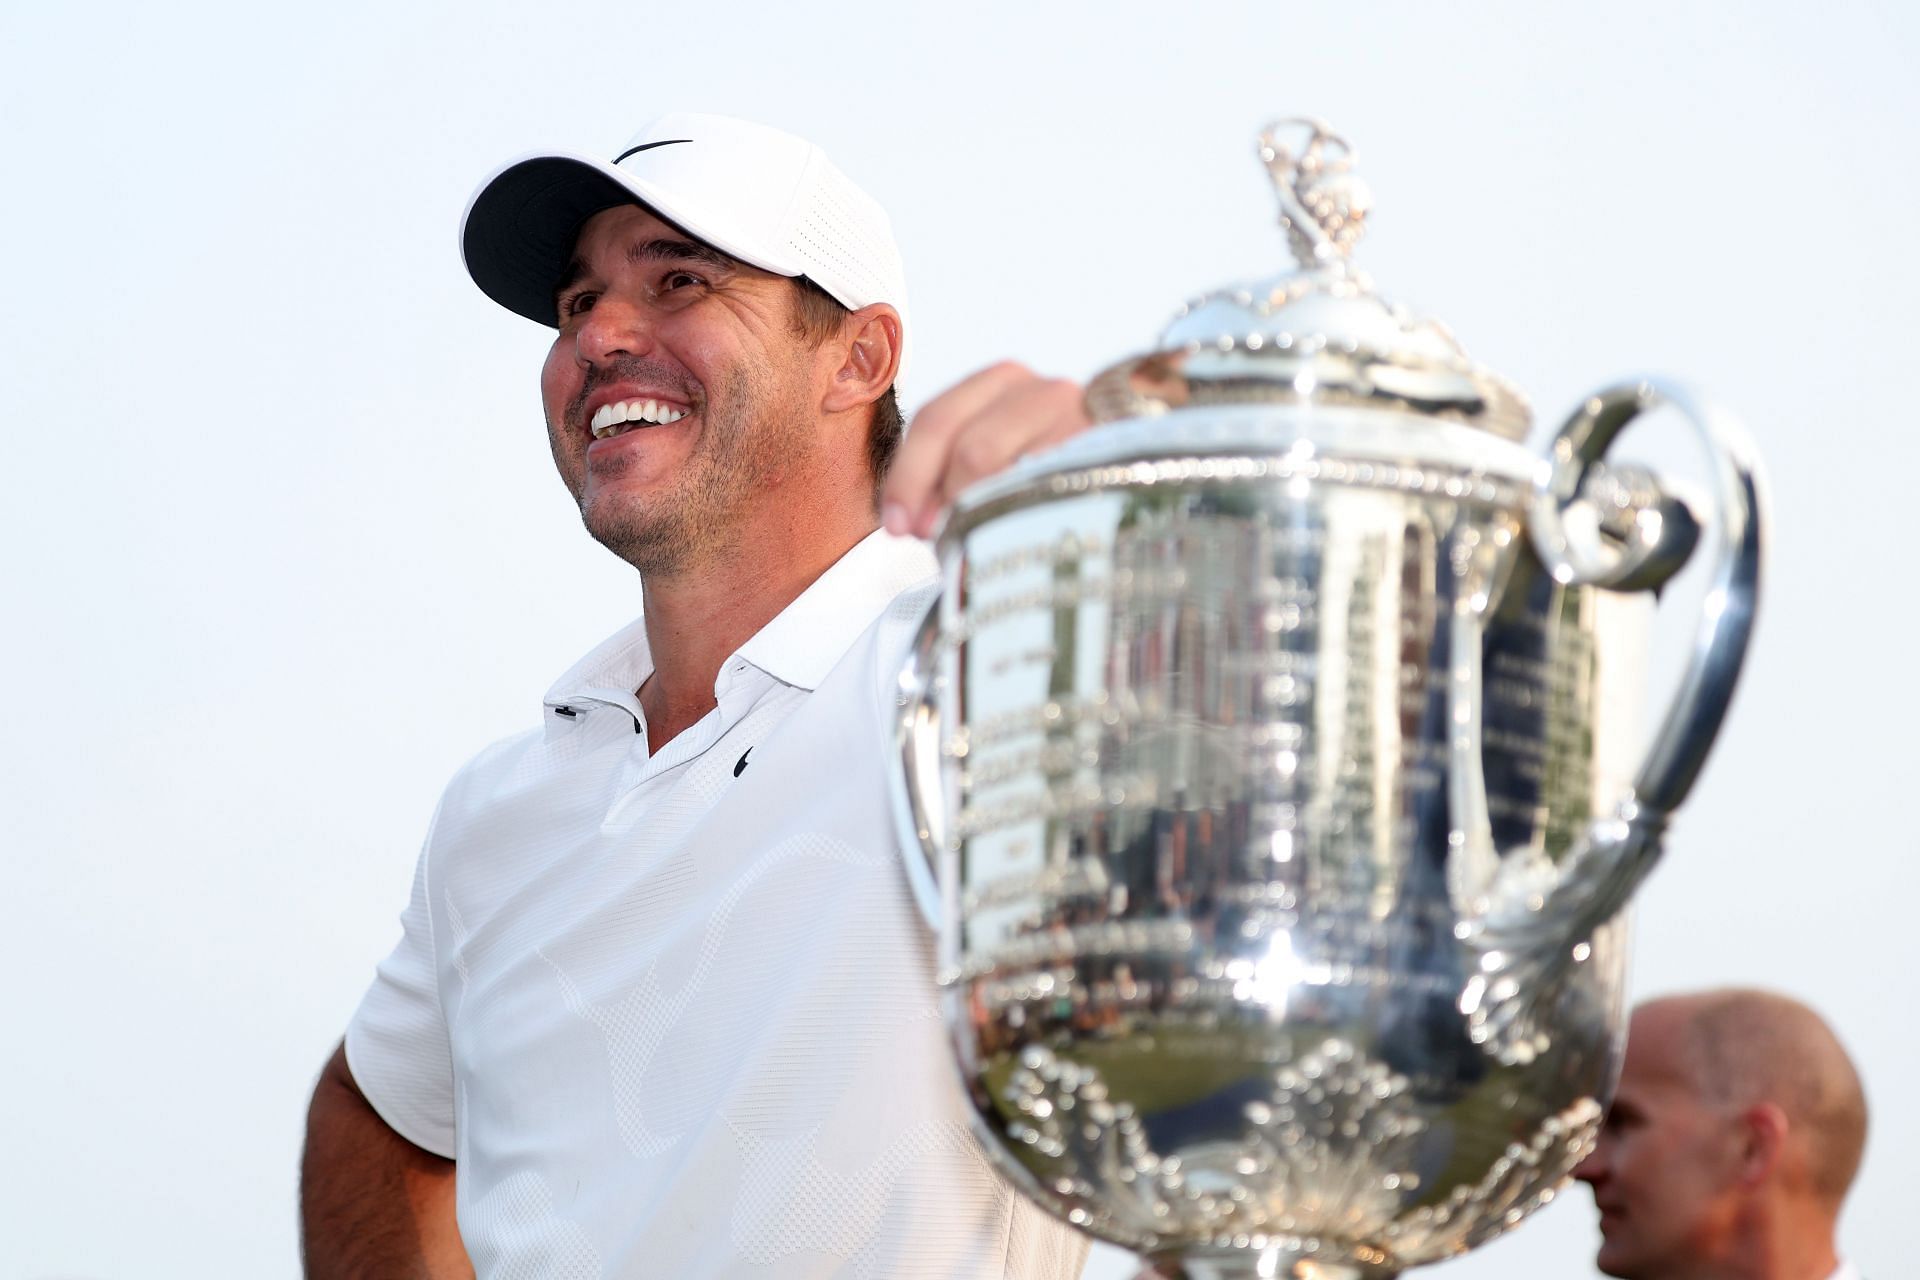 Brooks Koepka qualified for and won the PGA Championship